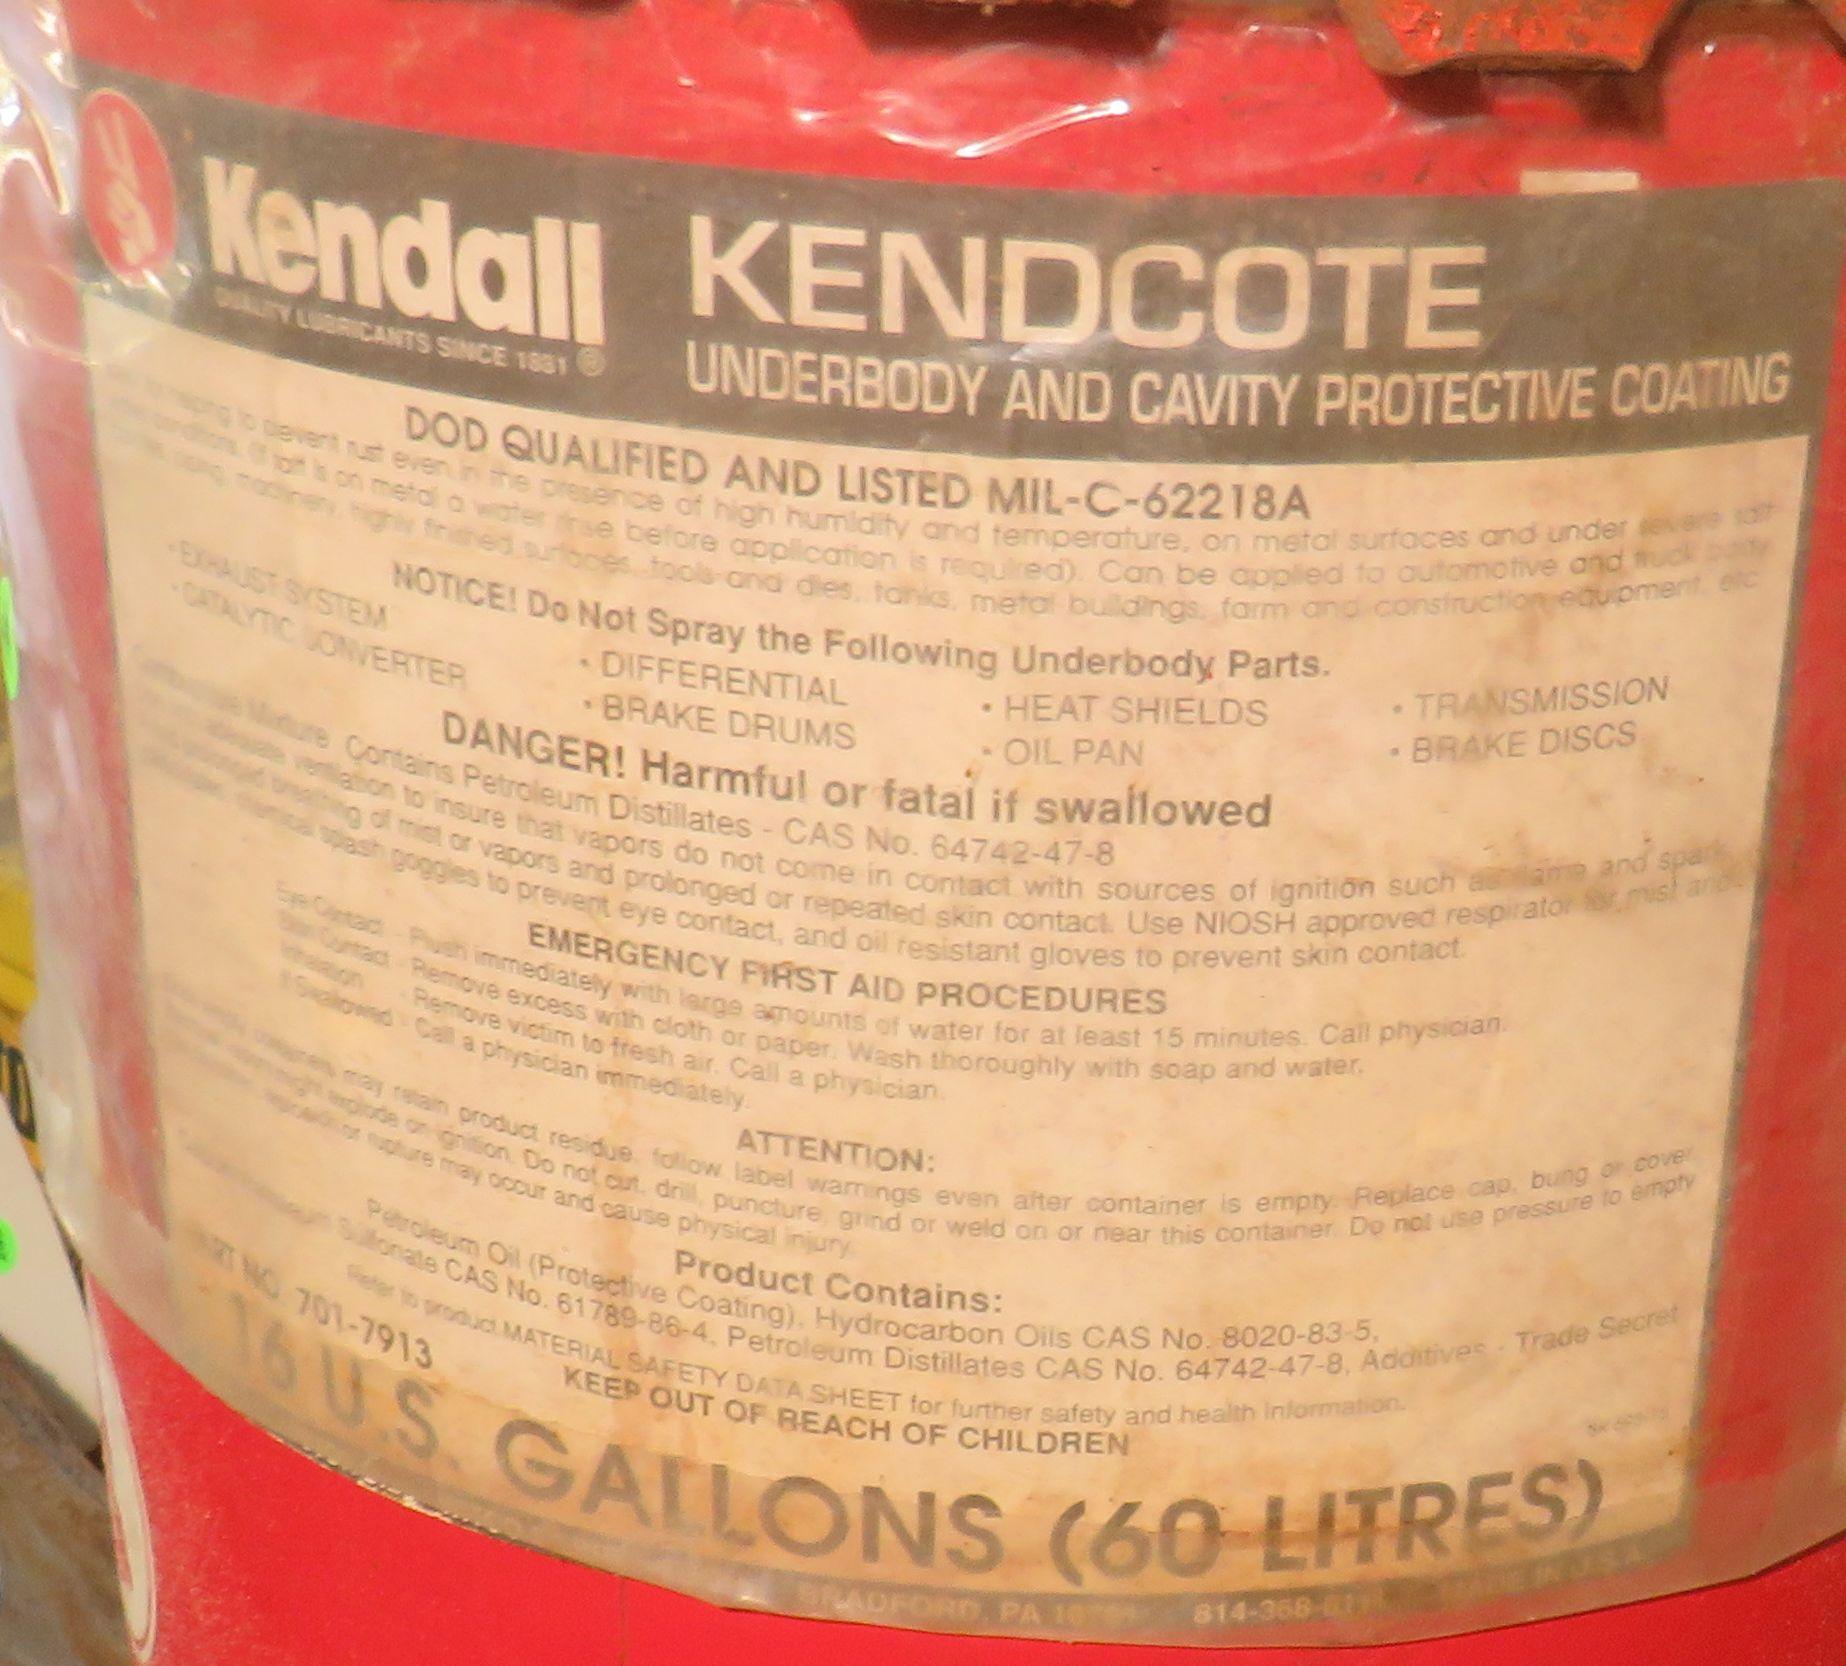 16 gal drum Kendall  Underbody and cavity protective coating